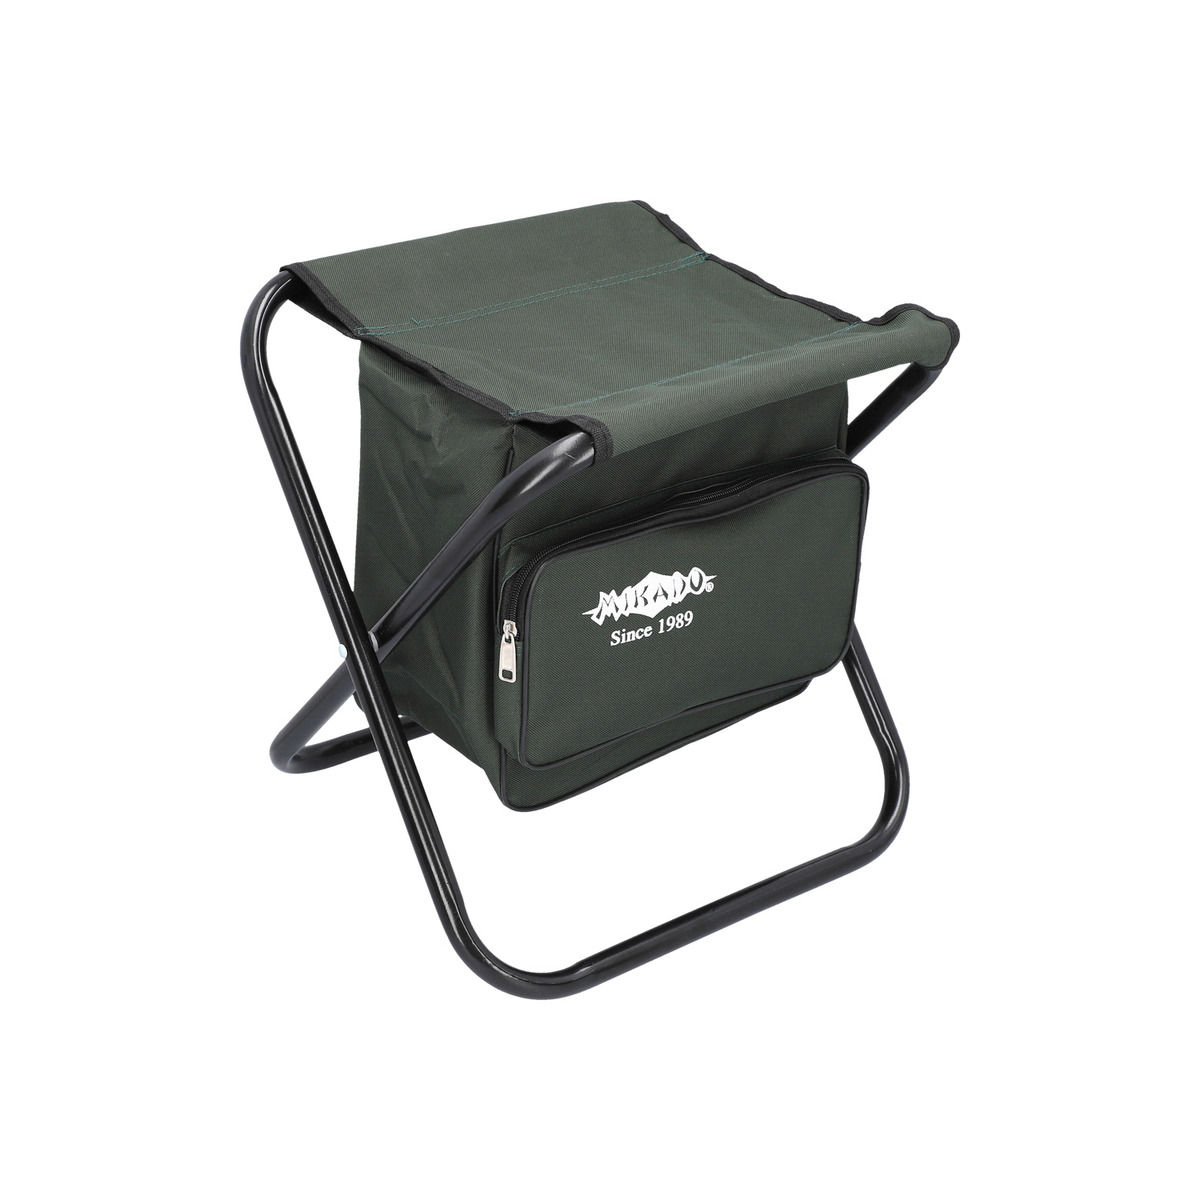 Mikado Stoolfoldable - WITH BAG (max w. 100kg) (40x38x31 cm)  GREEN